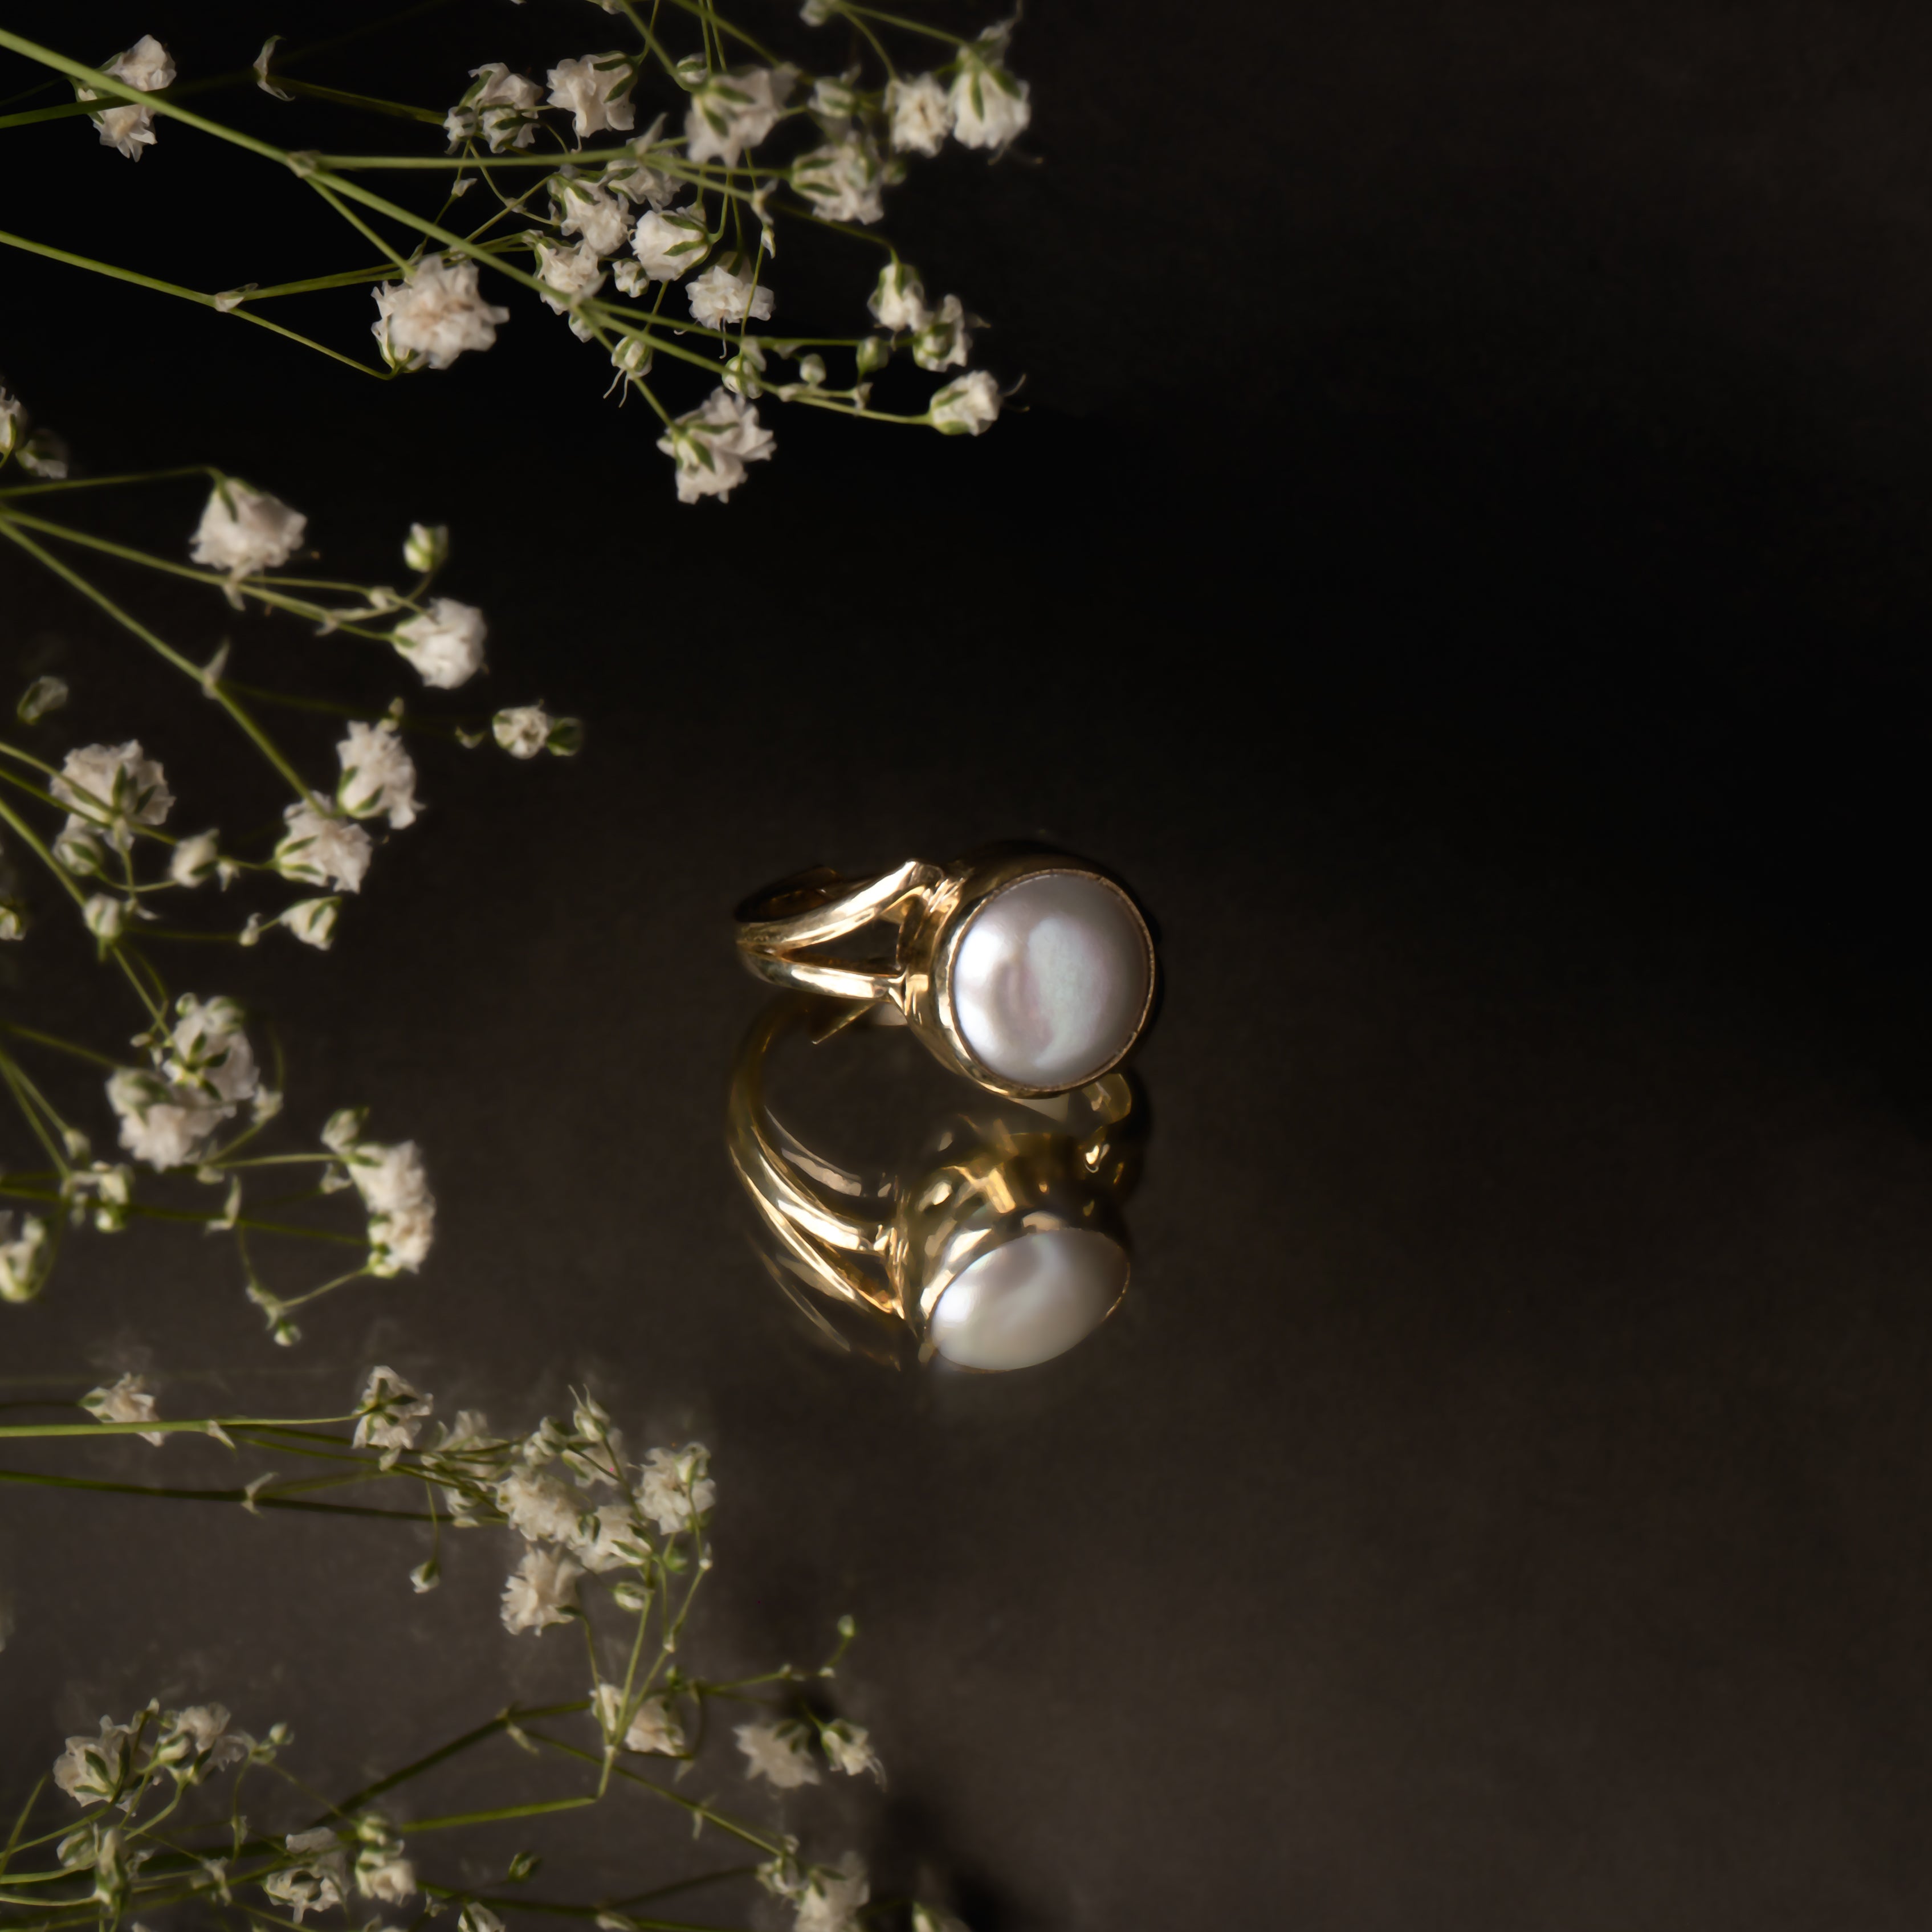 Pearl Ring: Do's and Dont's of wearing this moon stone